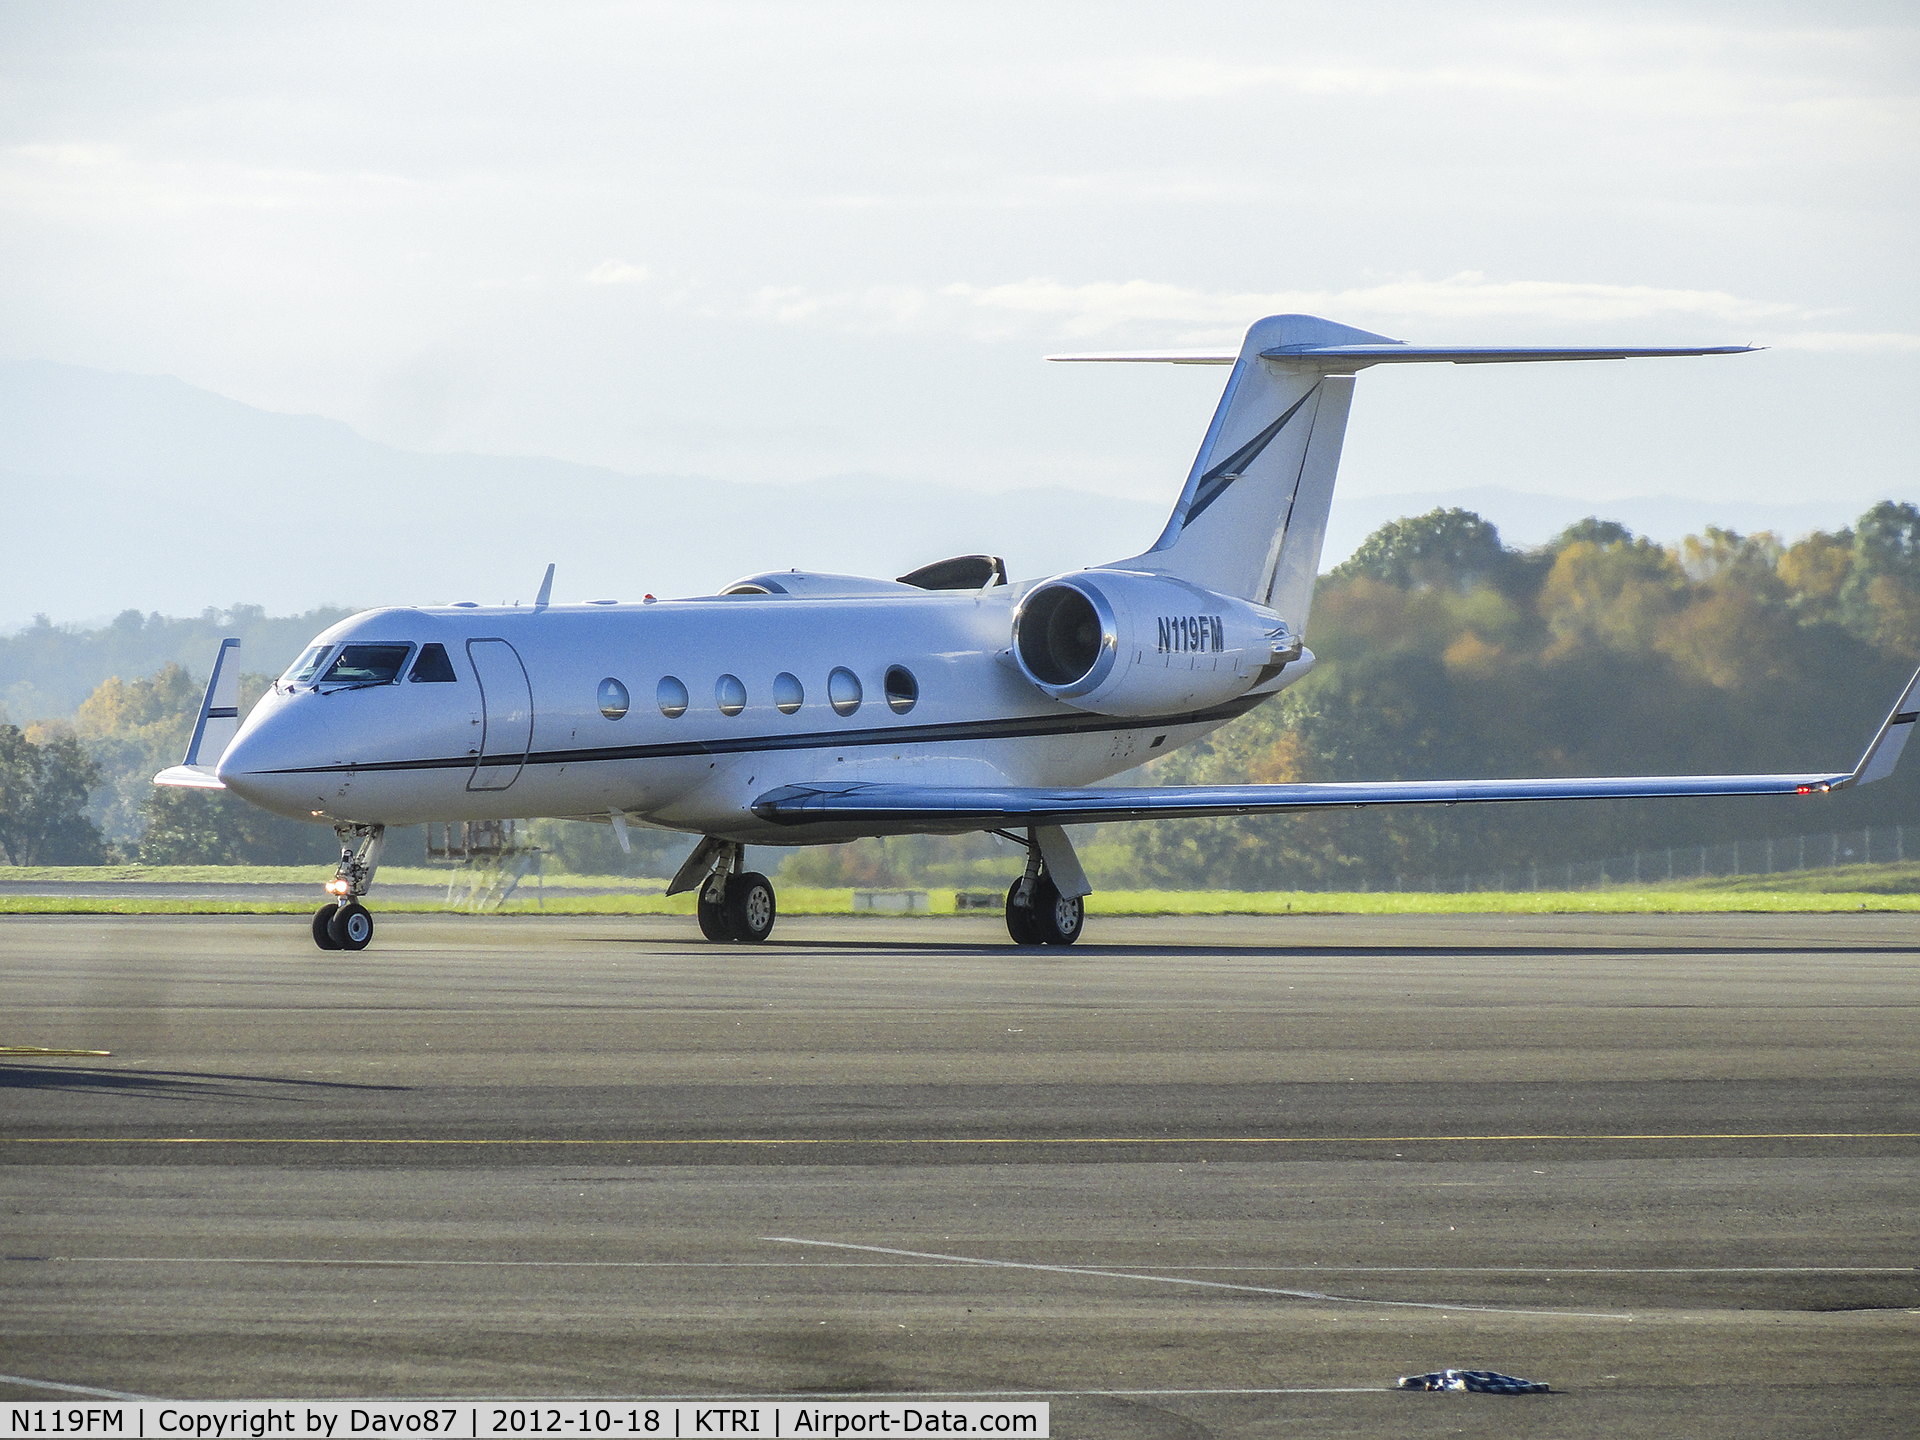 N119FM, 2001 Gulfstream Aerospace G-IV C/N 1464, Landed at Tri-Cities Airport (KTRI) on October 18, 2012.